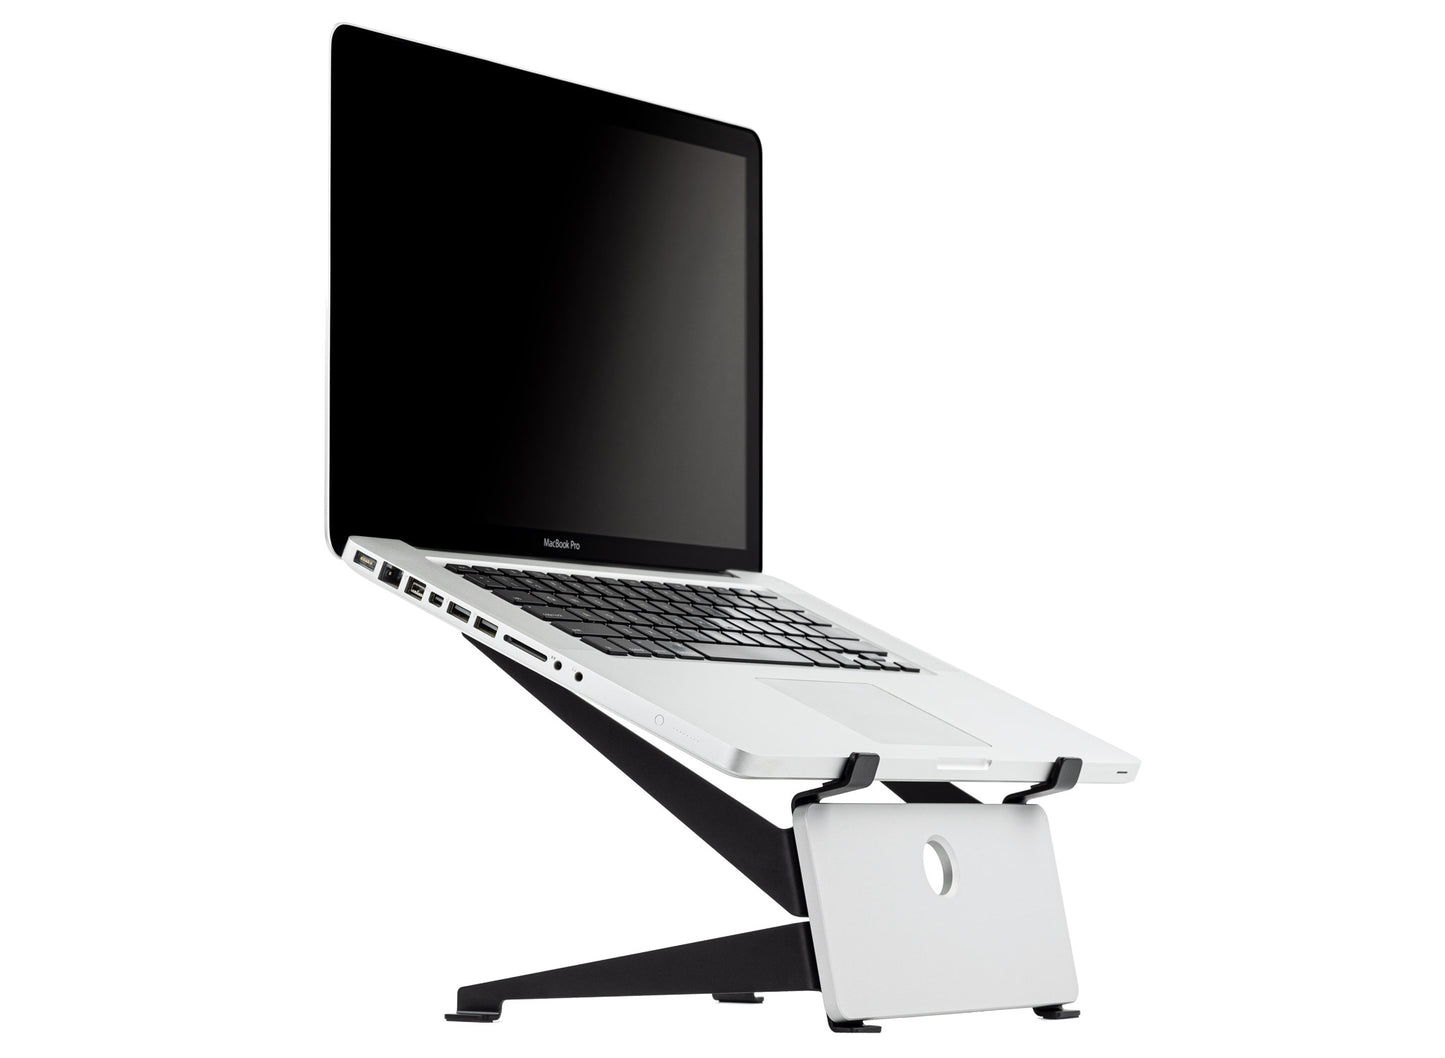 SVALT Cooling Stand model SRxN silver front side view for silent passive cooling performance with Apple and PC laptops